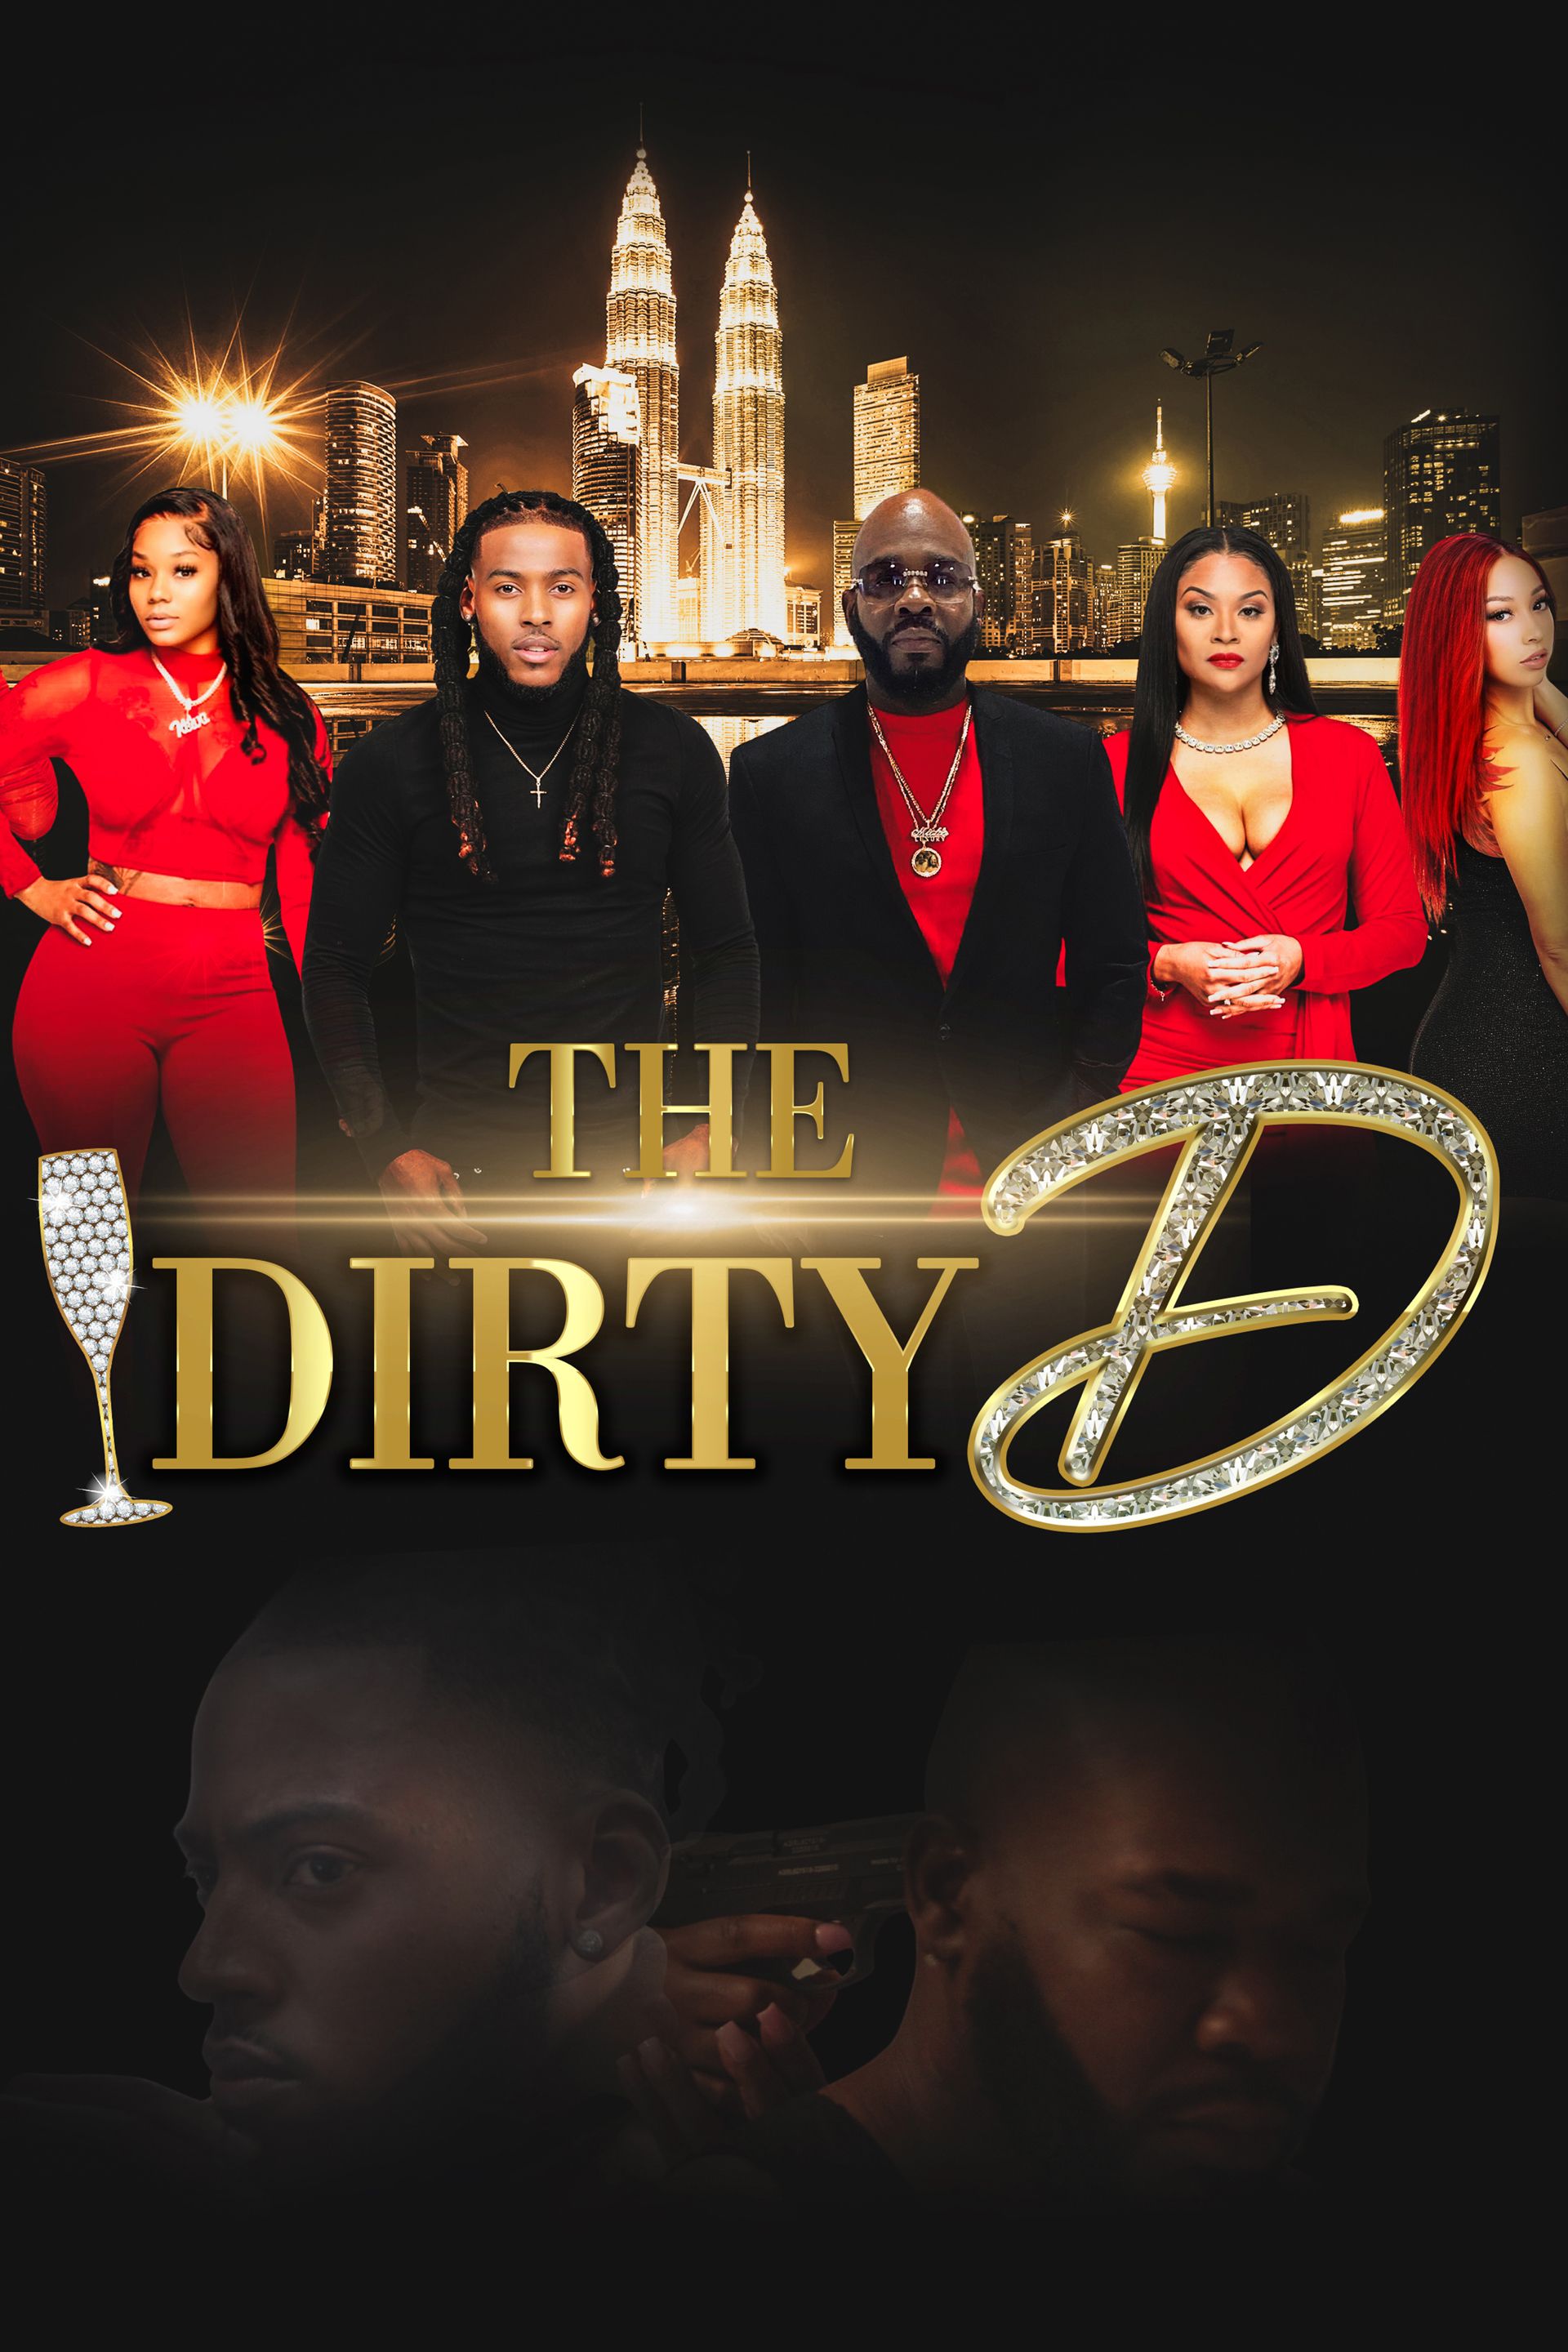 Watch The Dirty D Streaming Online